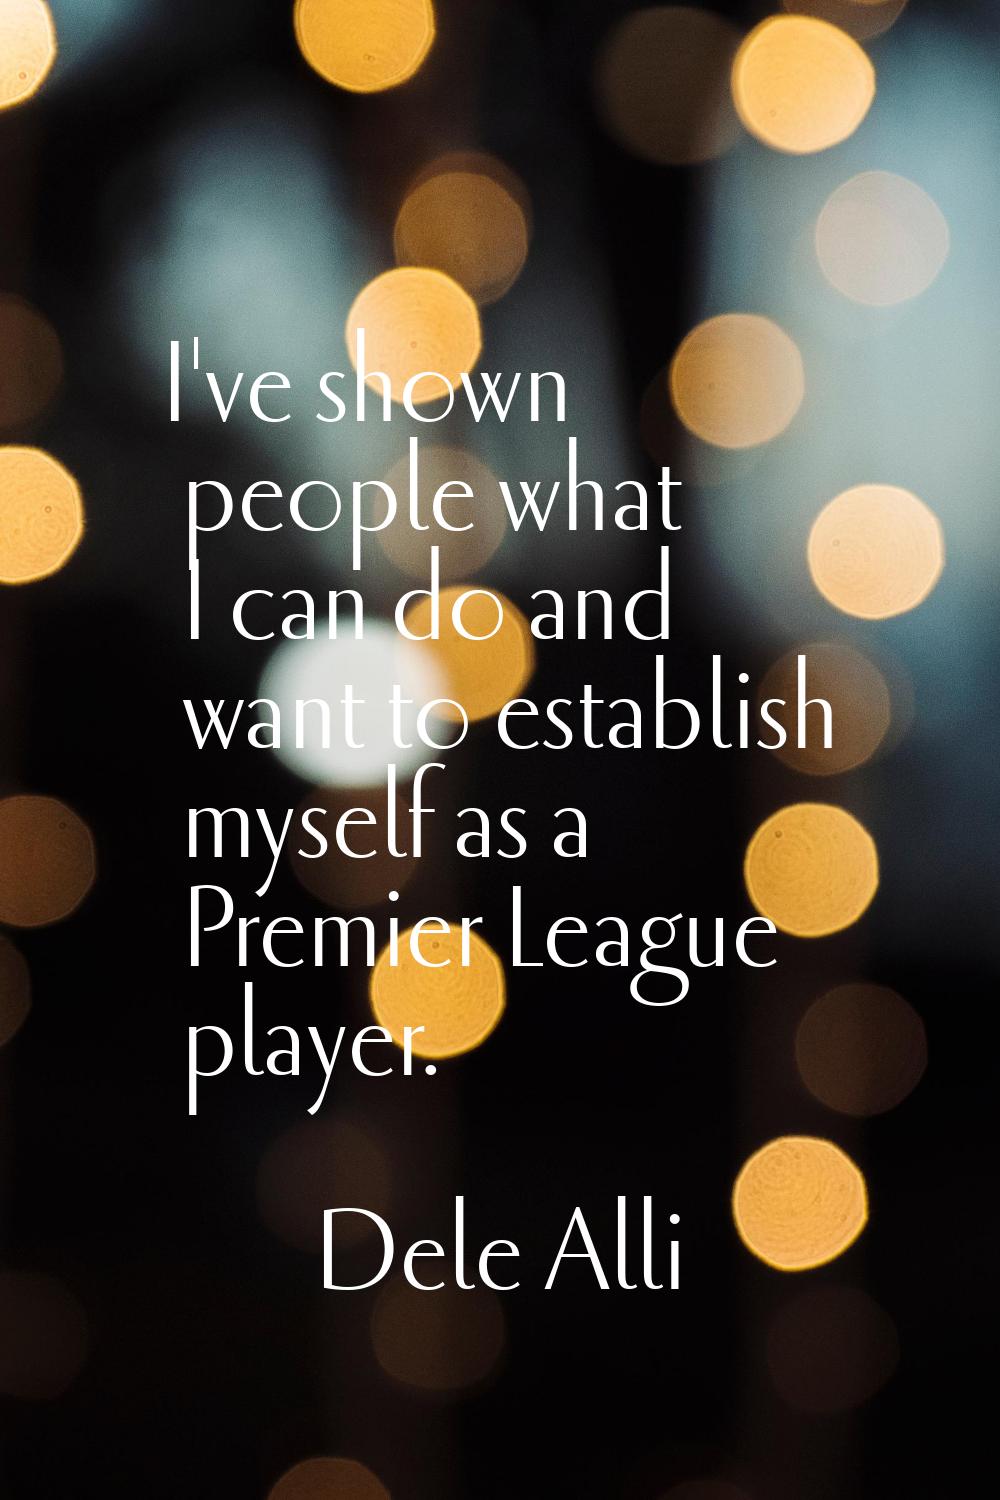 I've shown people what I can do and want to establish myself as a Premier League player.